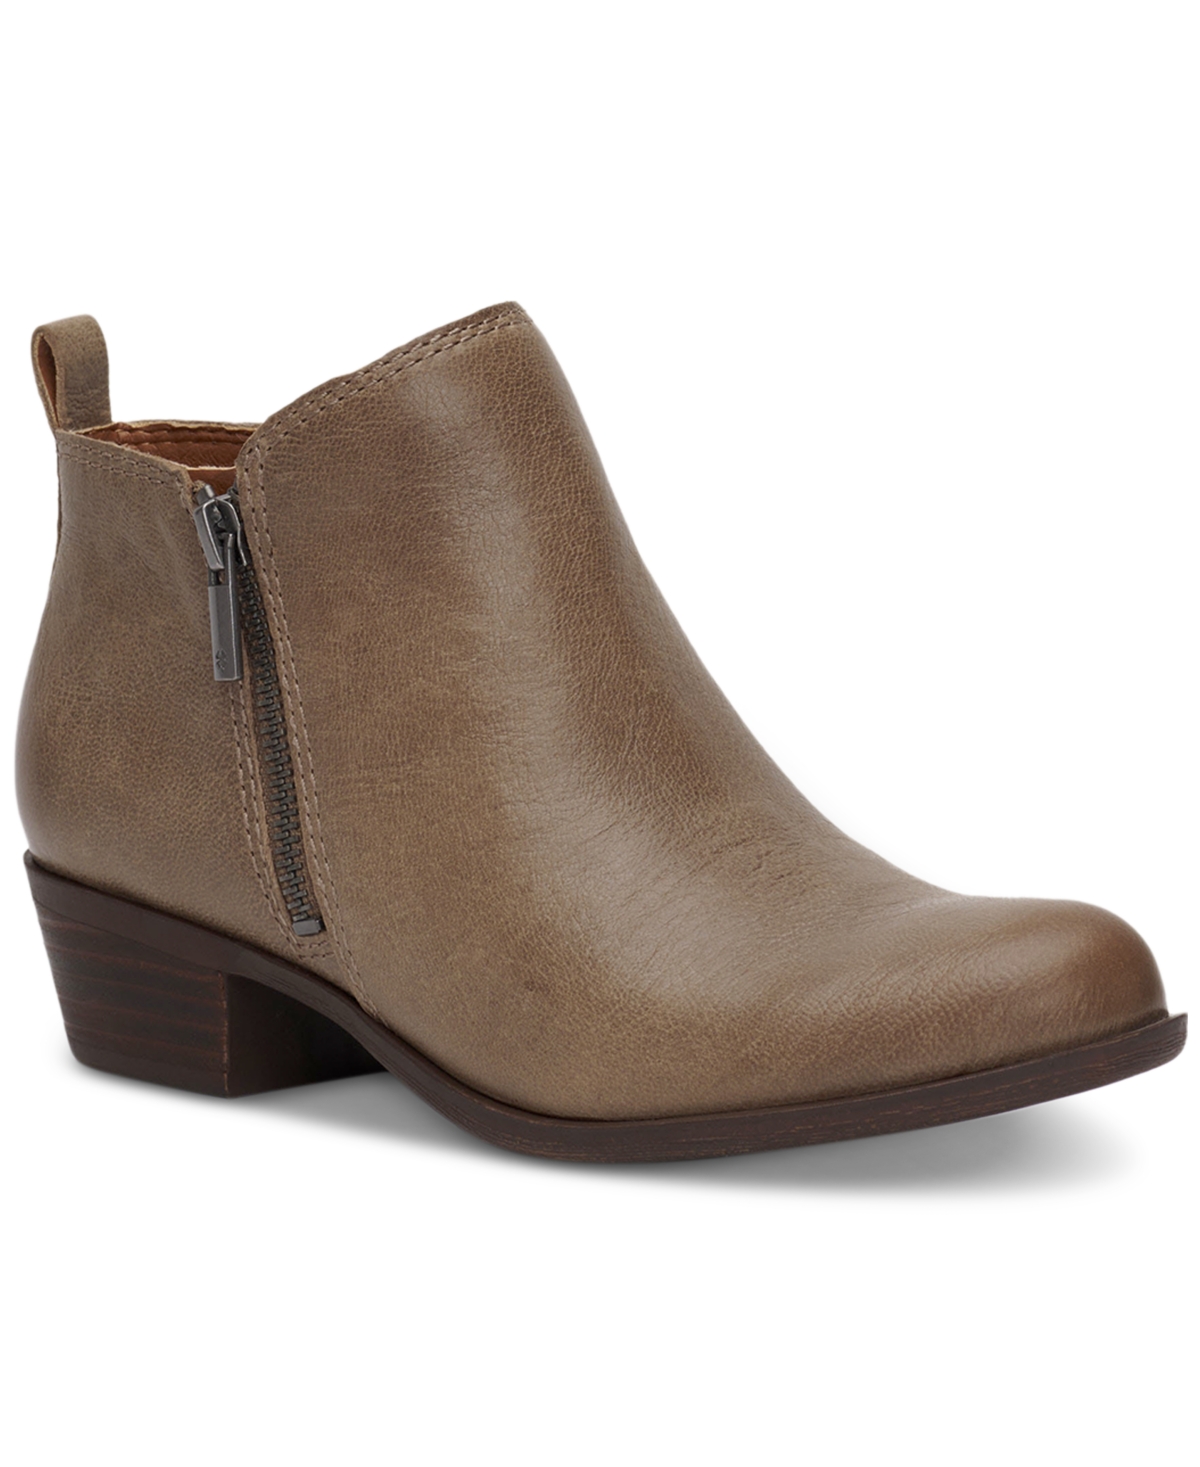 Women's Basel Ankle Booties - Dune Leather